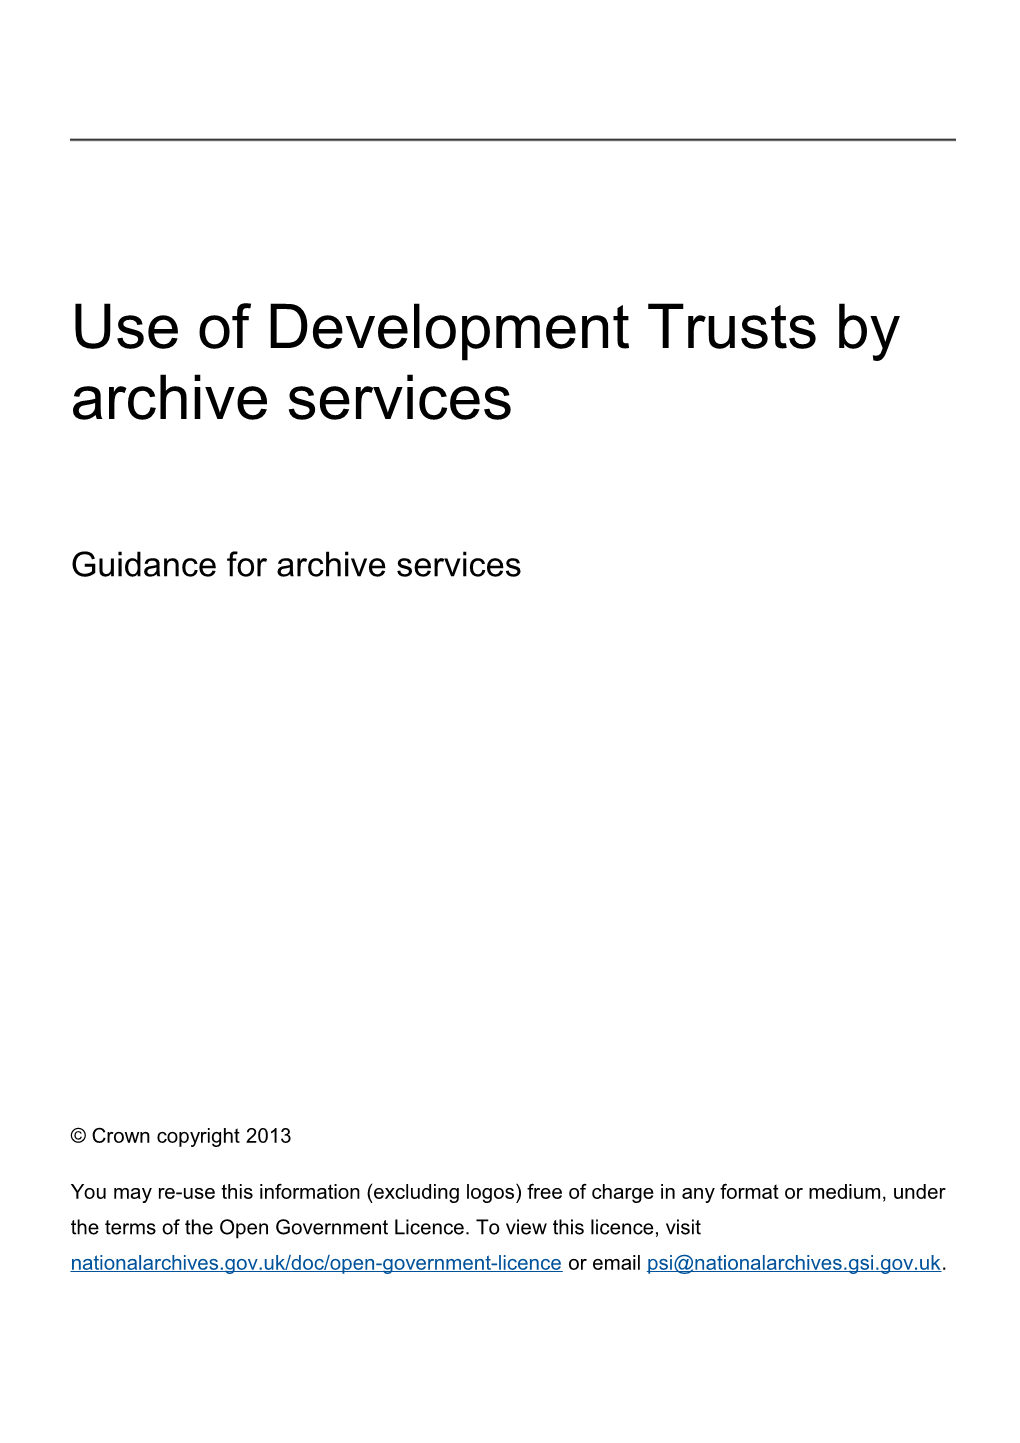 Use of Development Trusts by Archive Services